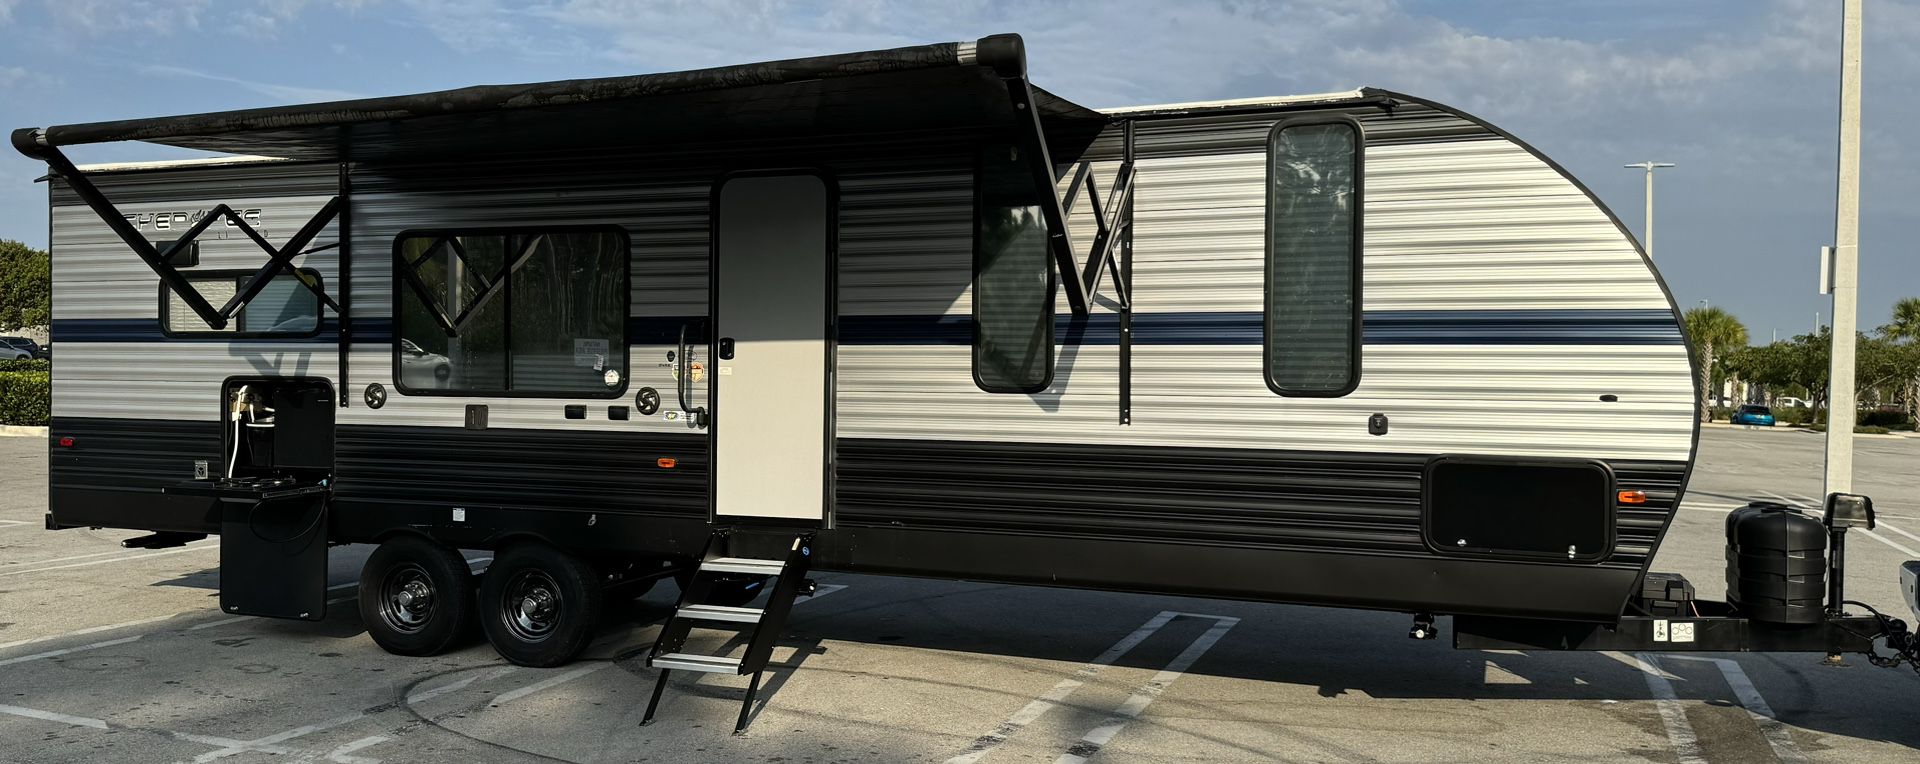 2019 Forest River Cherokee 272RK